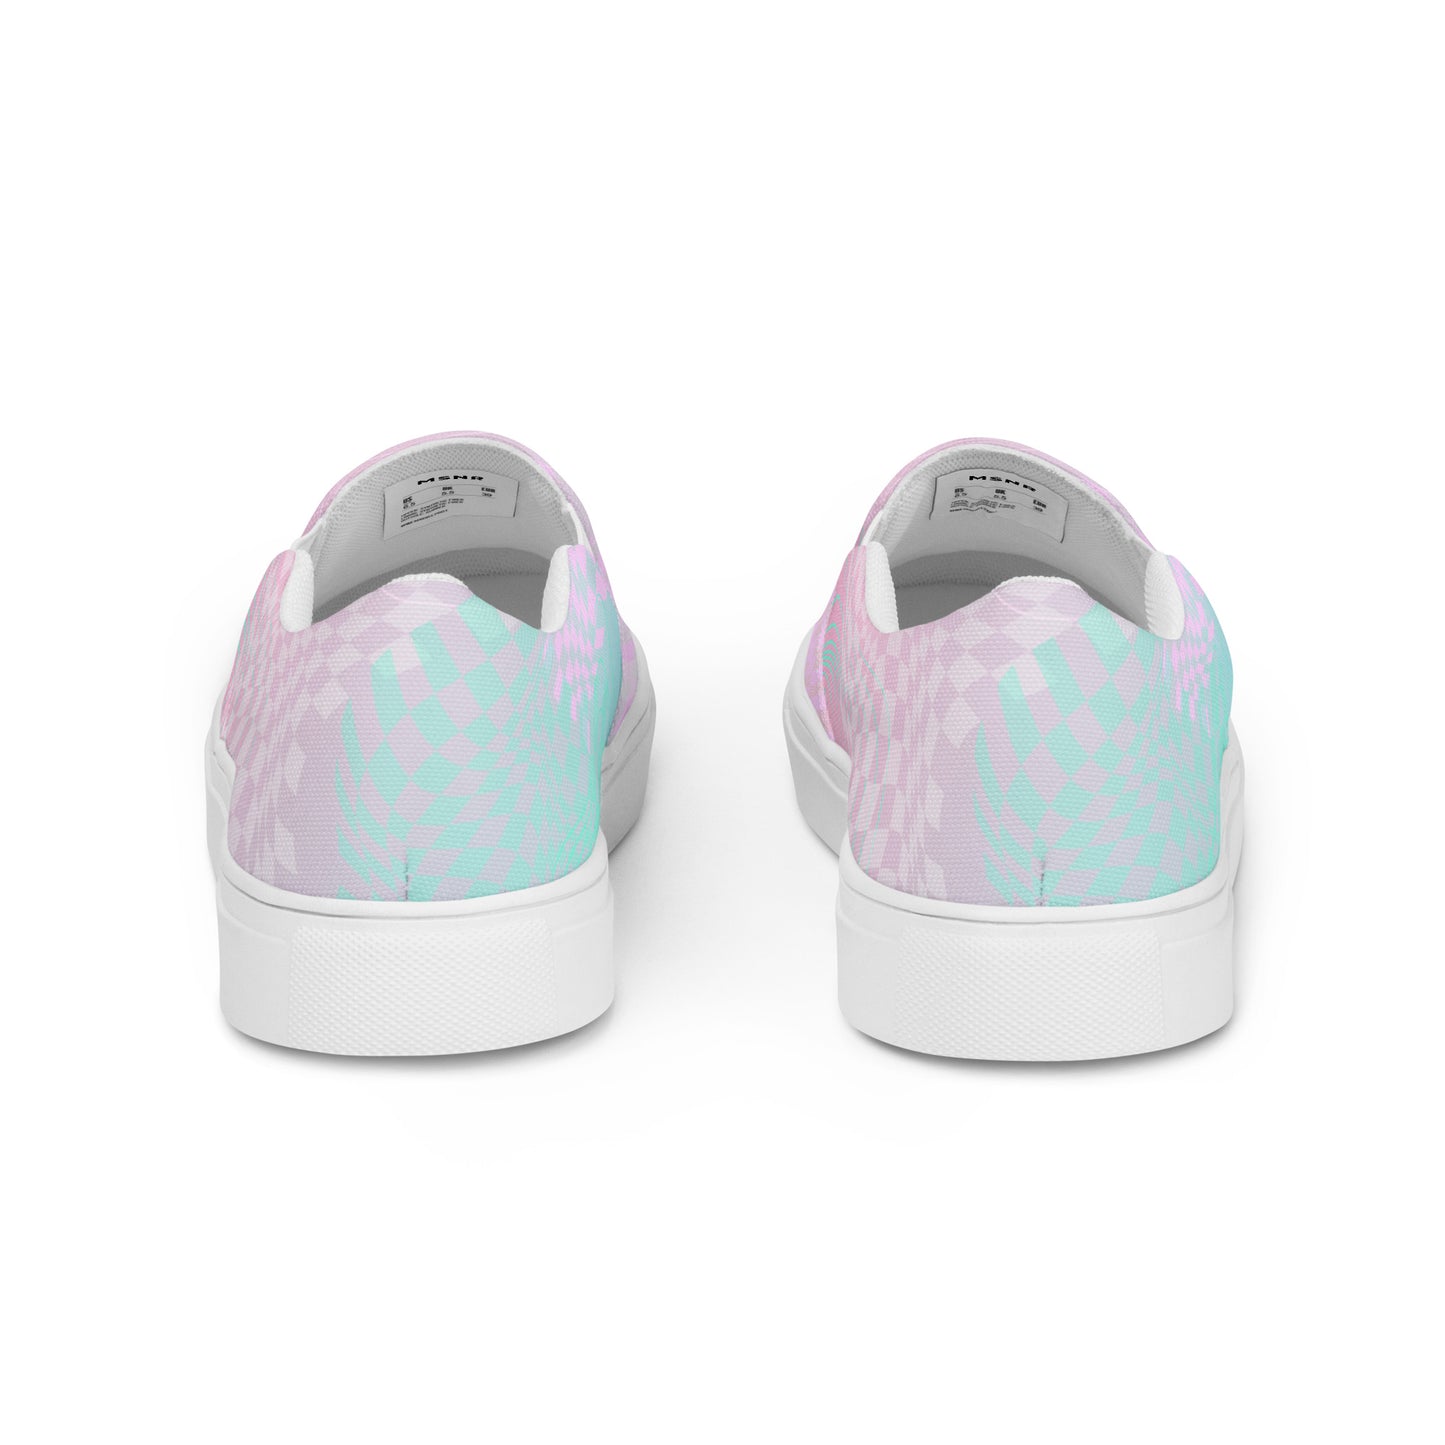 Cotton Candy Women’s slip-on canvas shoes